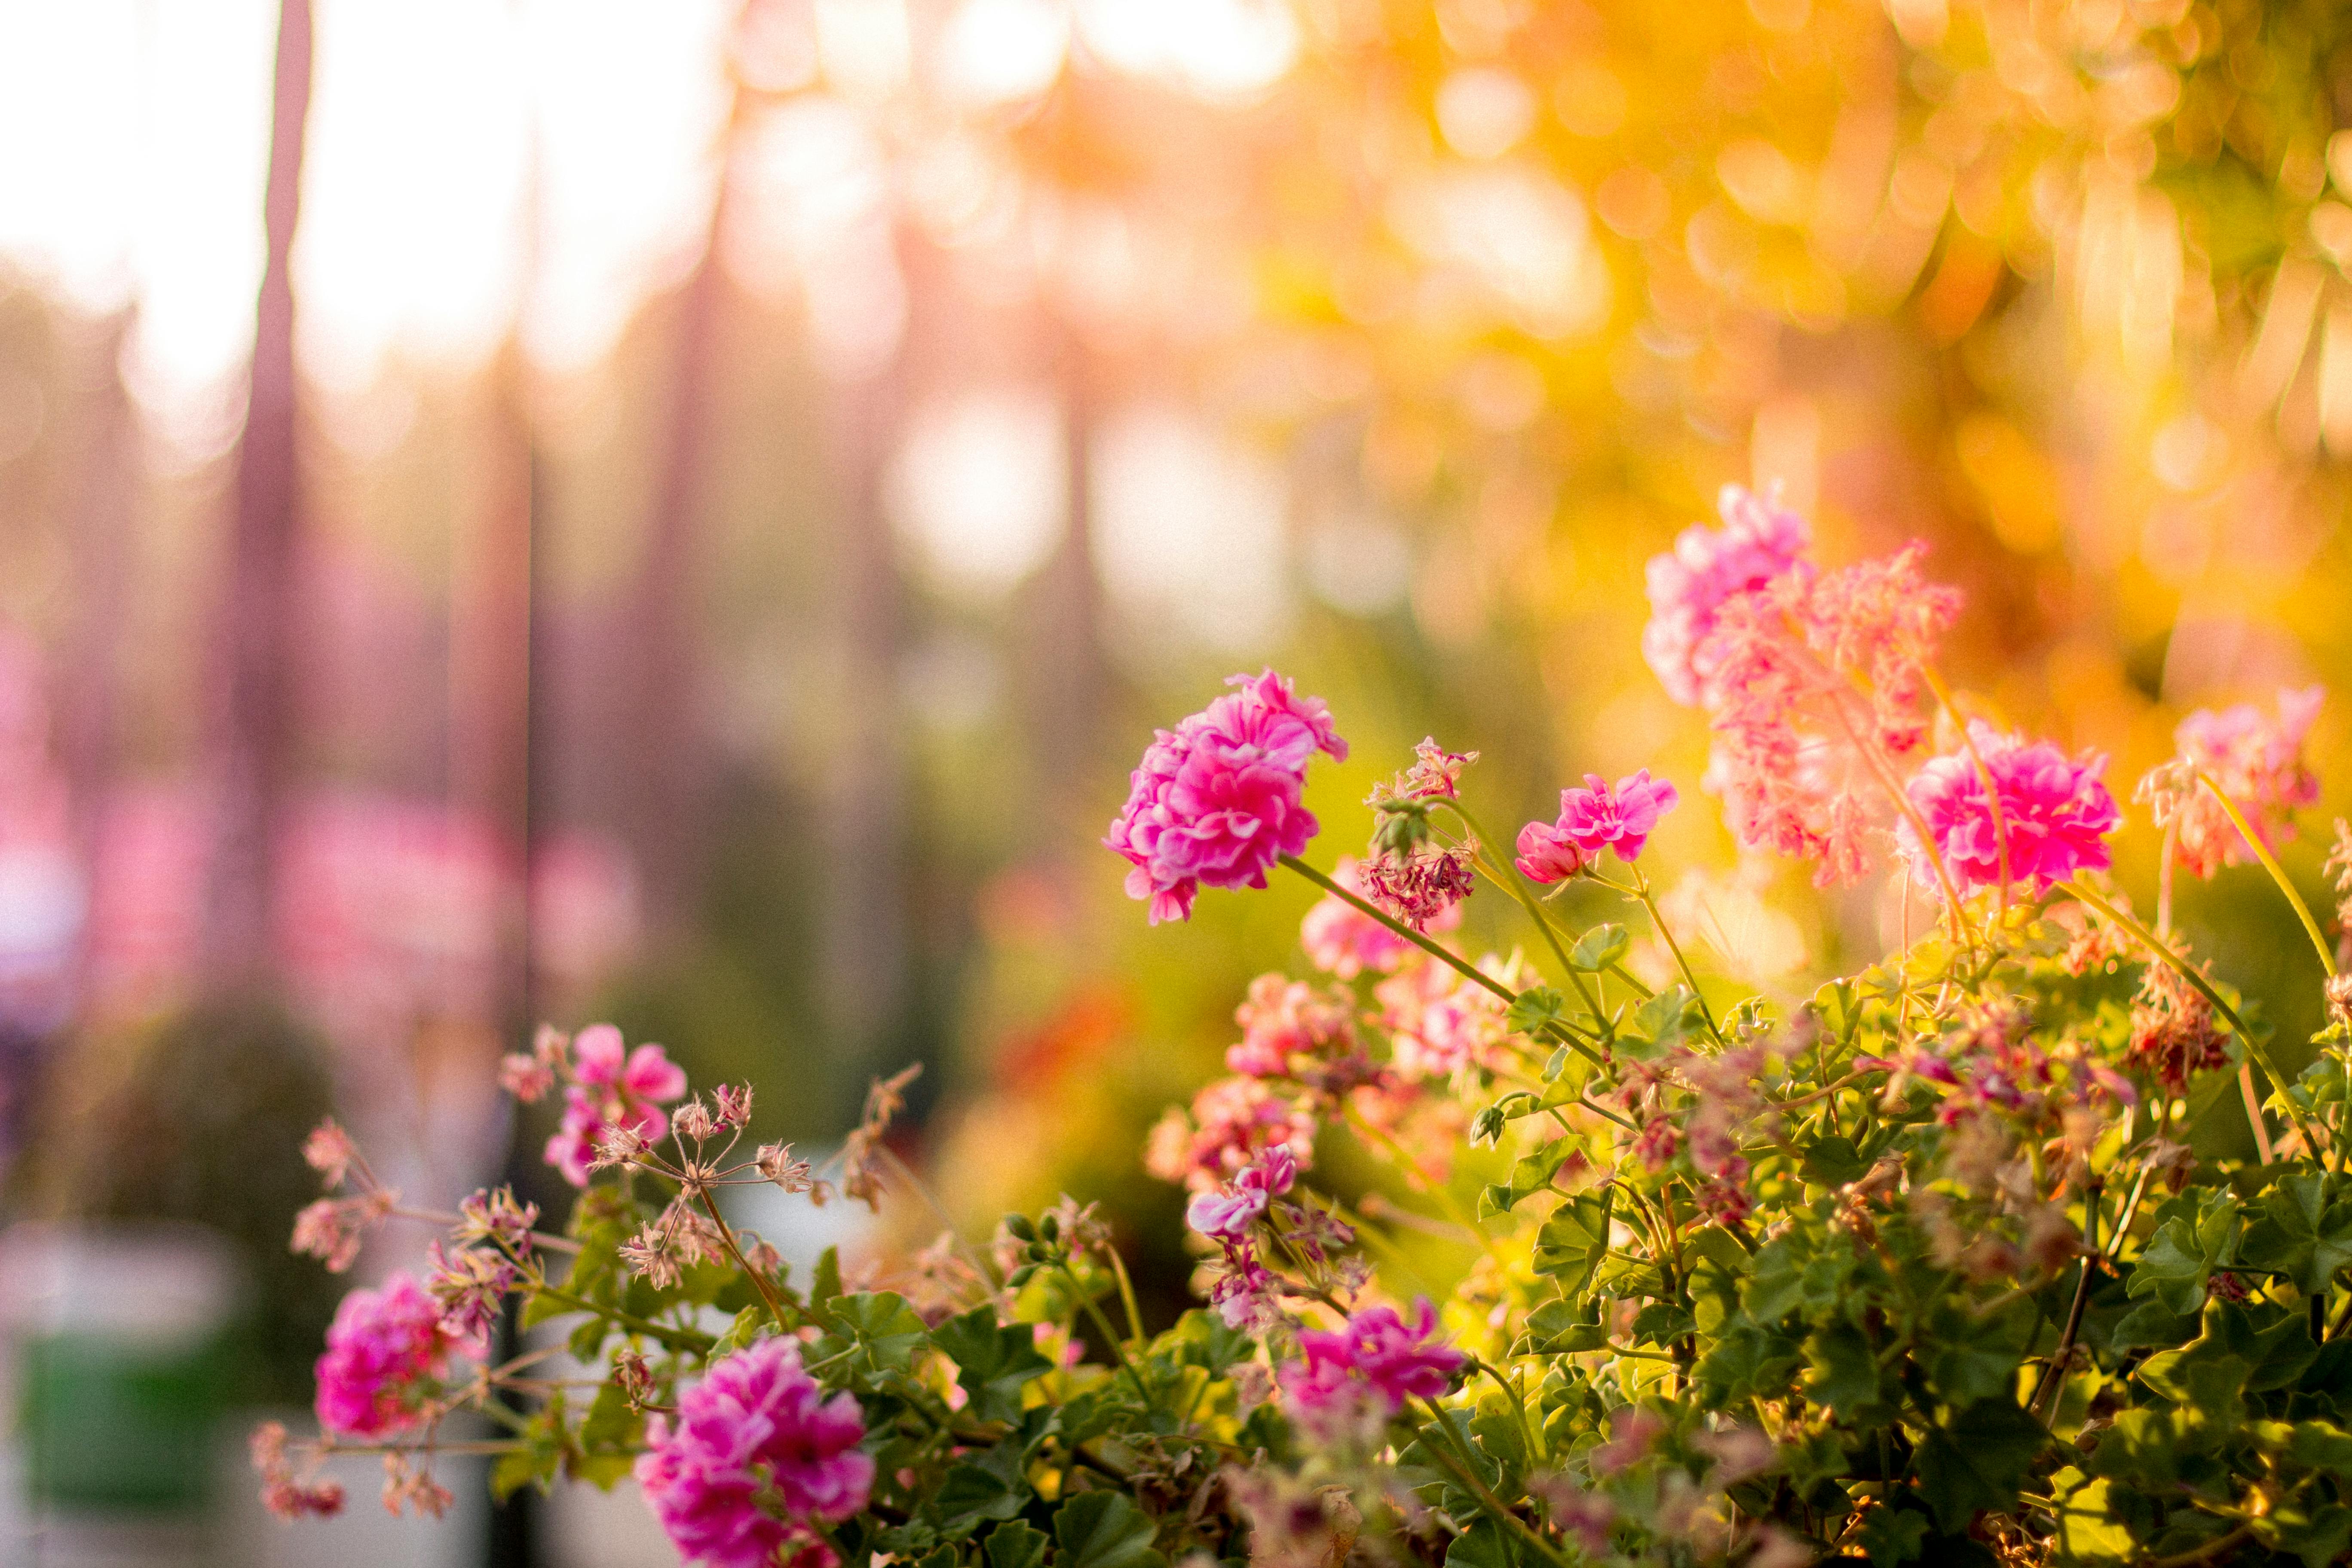 Spring Flowers Scenery HD Wallpapers Free Download ...